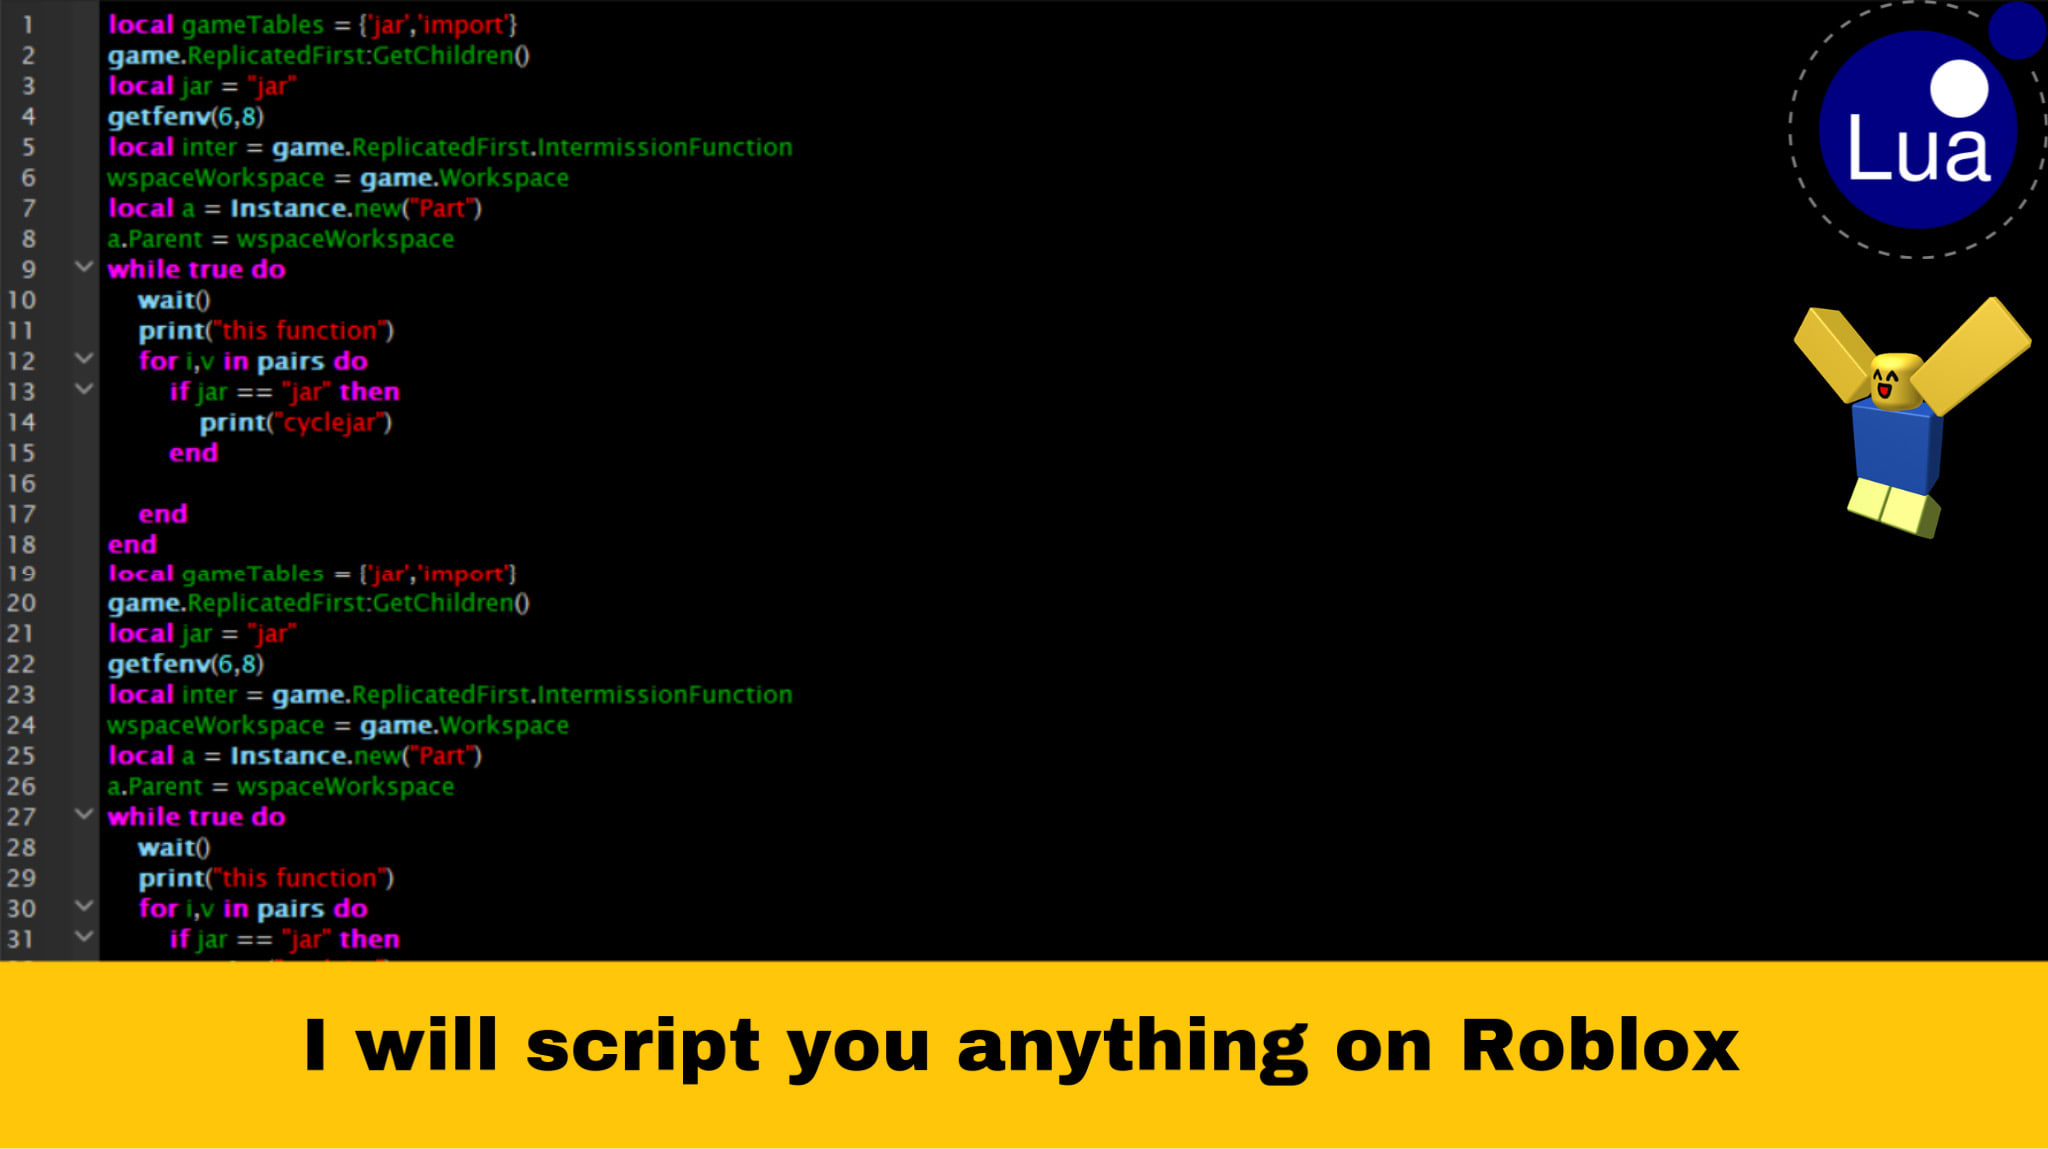 Make A Script Or A System For You On Roblox By Frepzter - roblox area 14 script